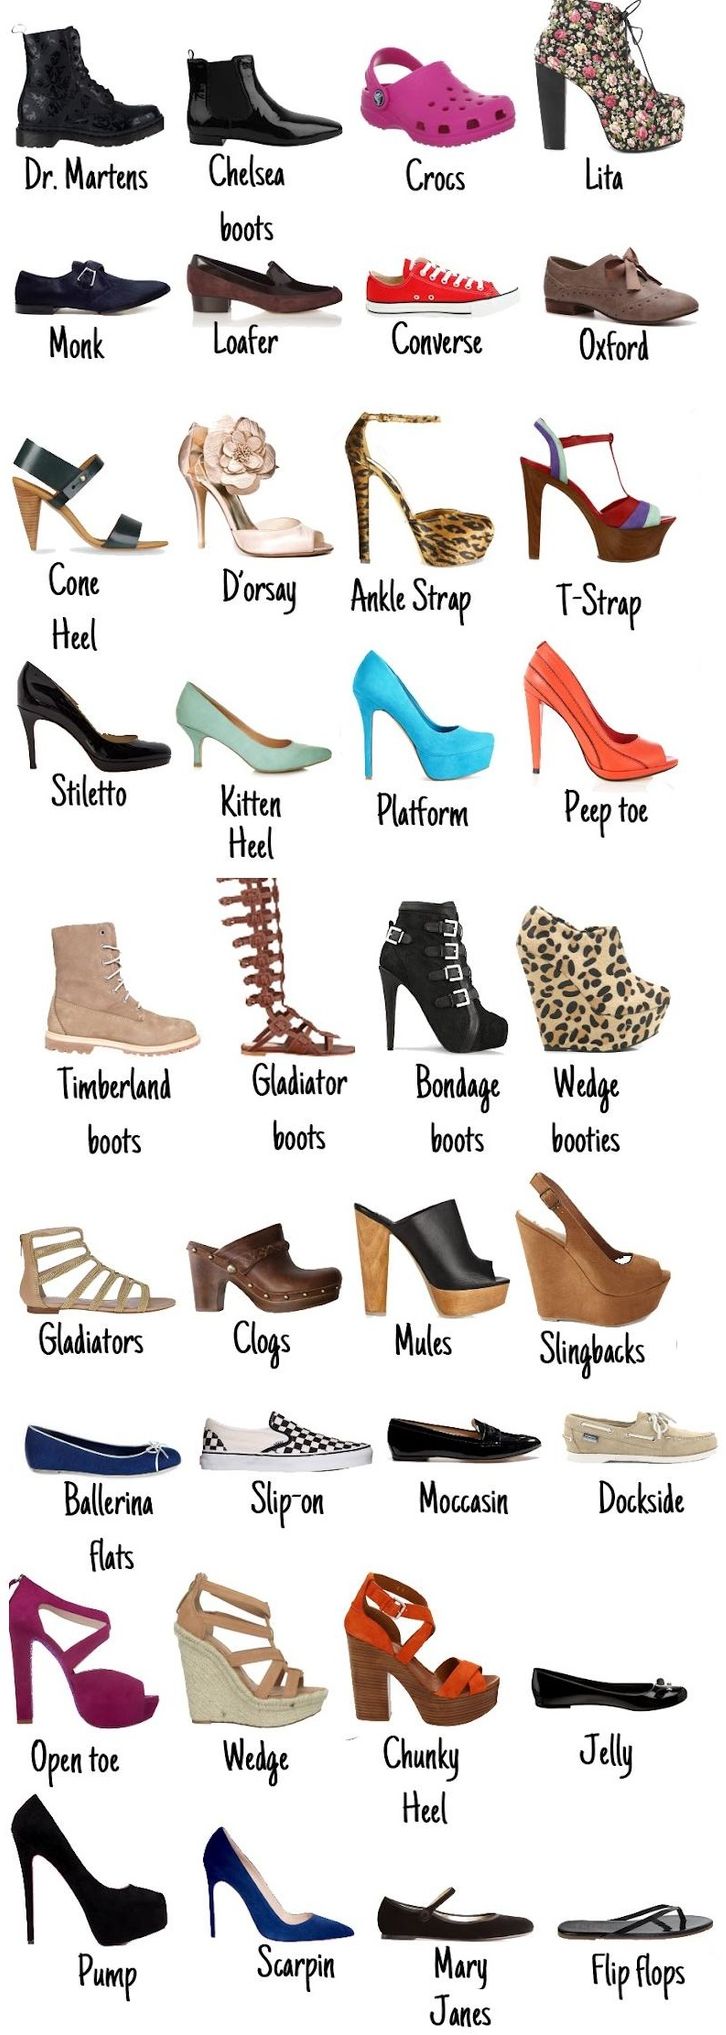 Fashion infographic : What Is Your Shoe Style? - InfographicNow.com ...